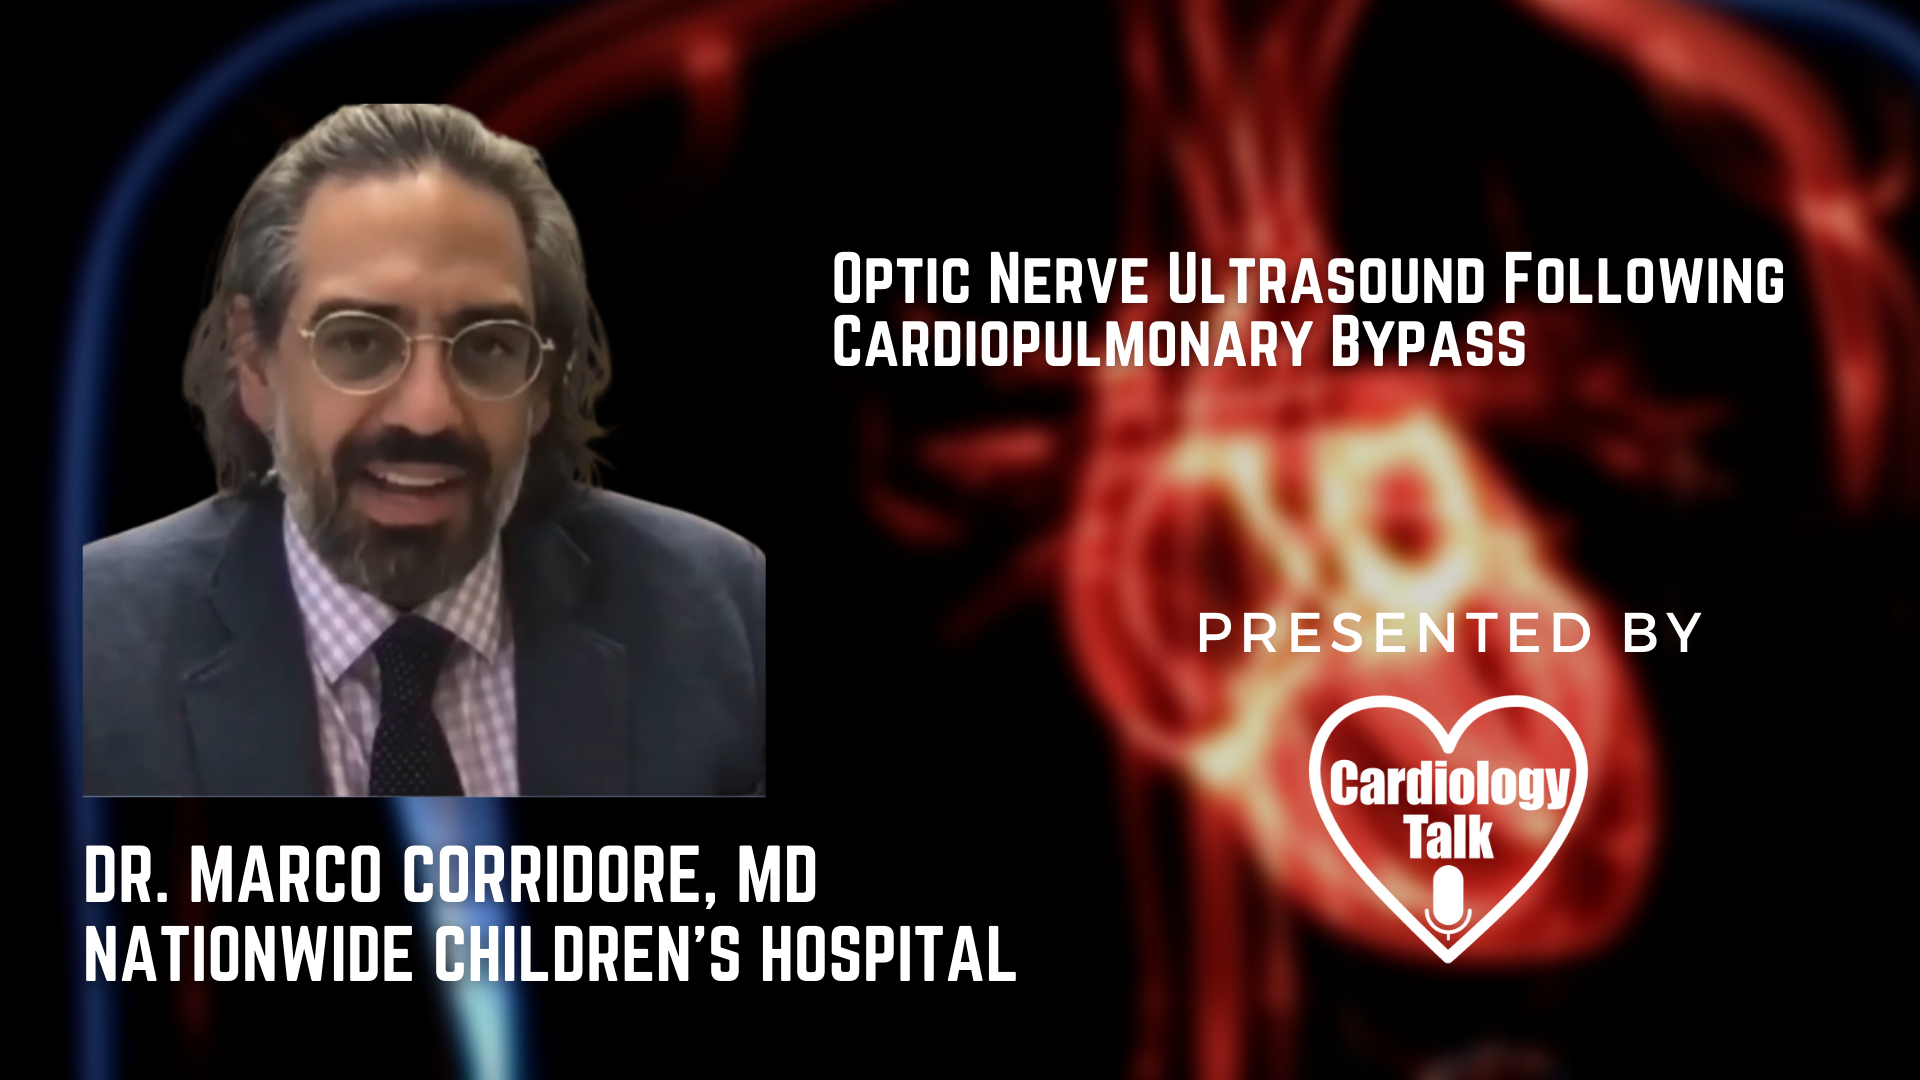 Marco Corridore, MD- A Pilot Study of Optic Nerve Ultrasound Following Cardiopulmonary Bypass